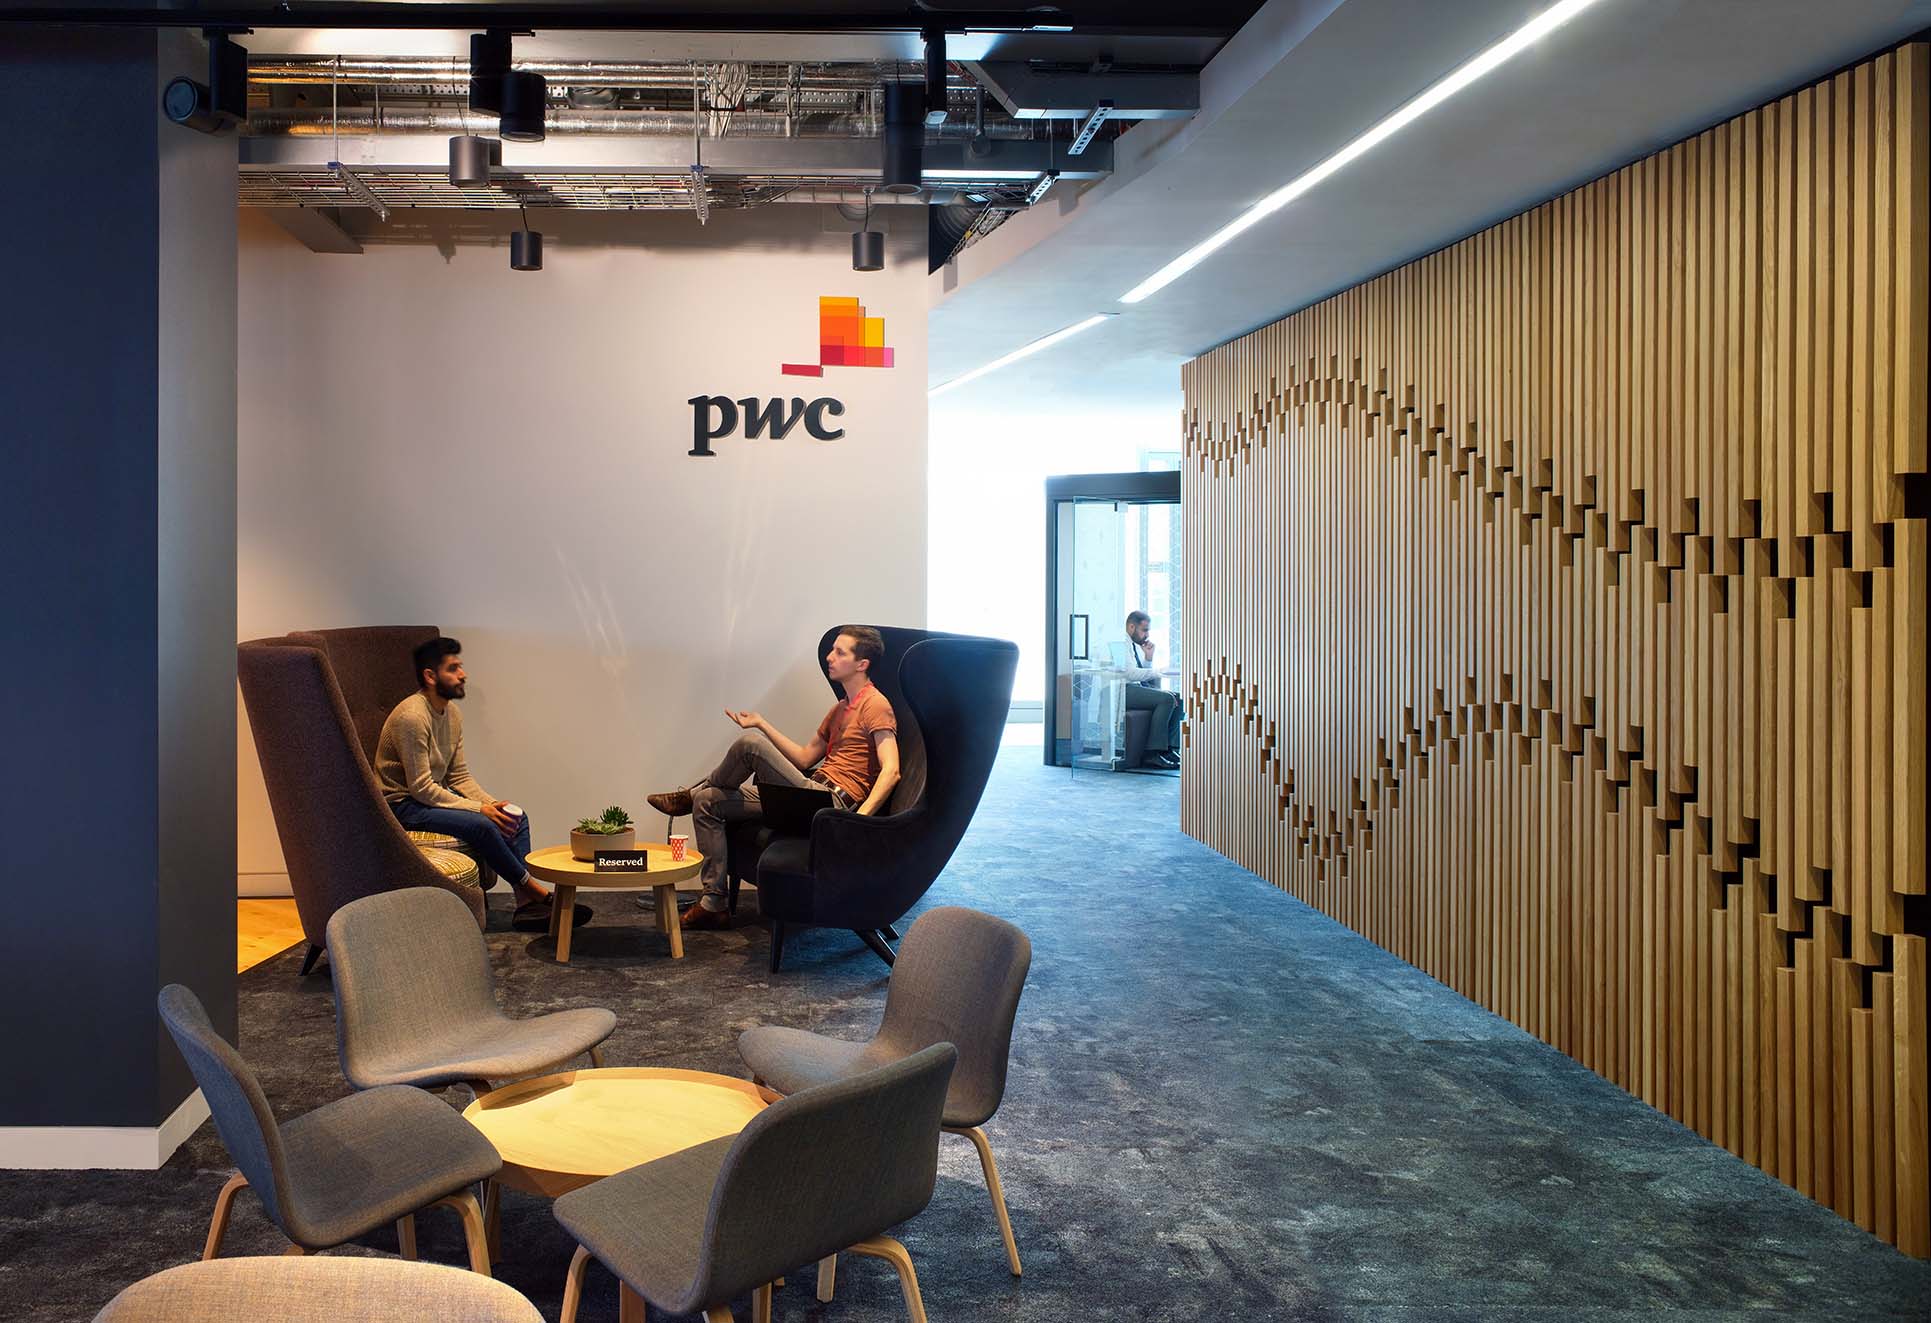 PwC Manchester includes a carefully considered eclectic mix of collaboration, quiet and presentation workspaces that make the best use of natural light and quiet corners.